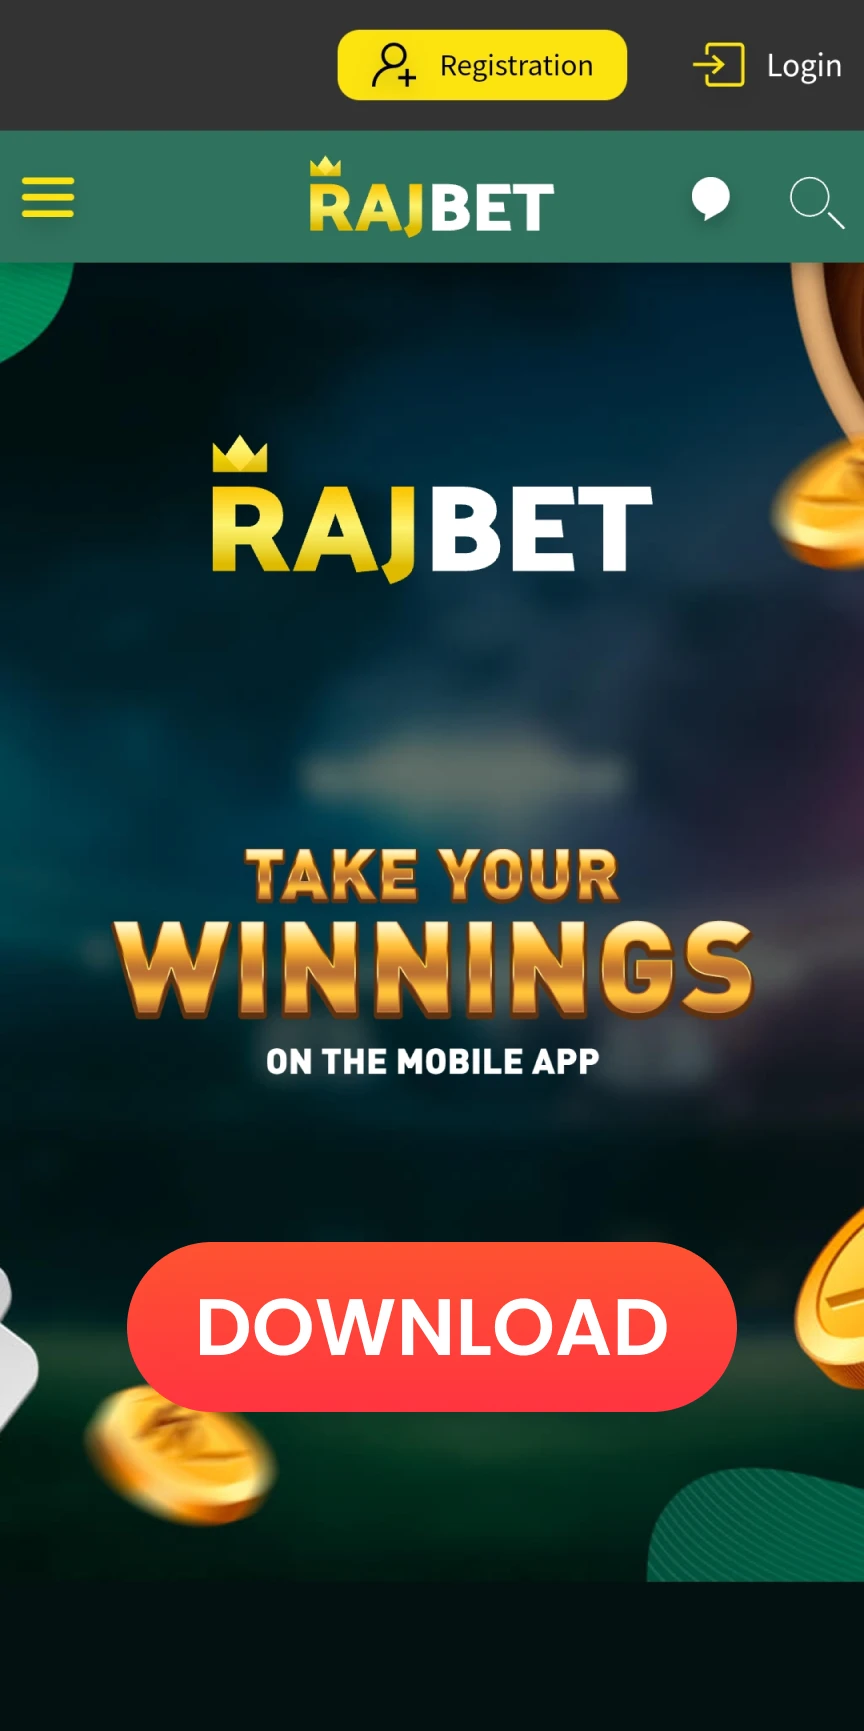 You need to start downloading the Rajbet app for iOS.